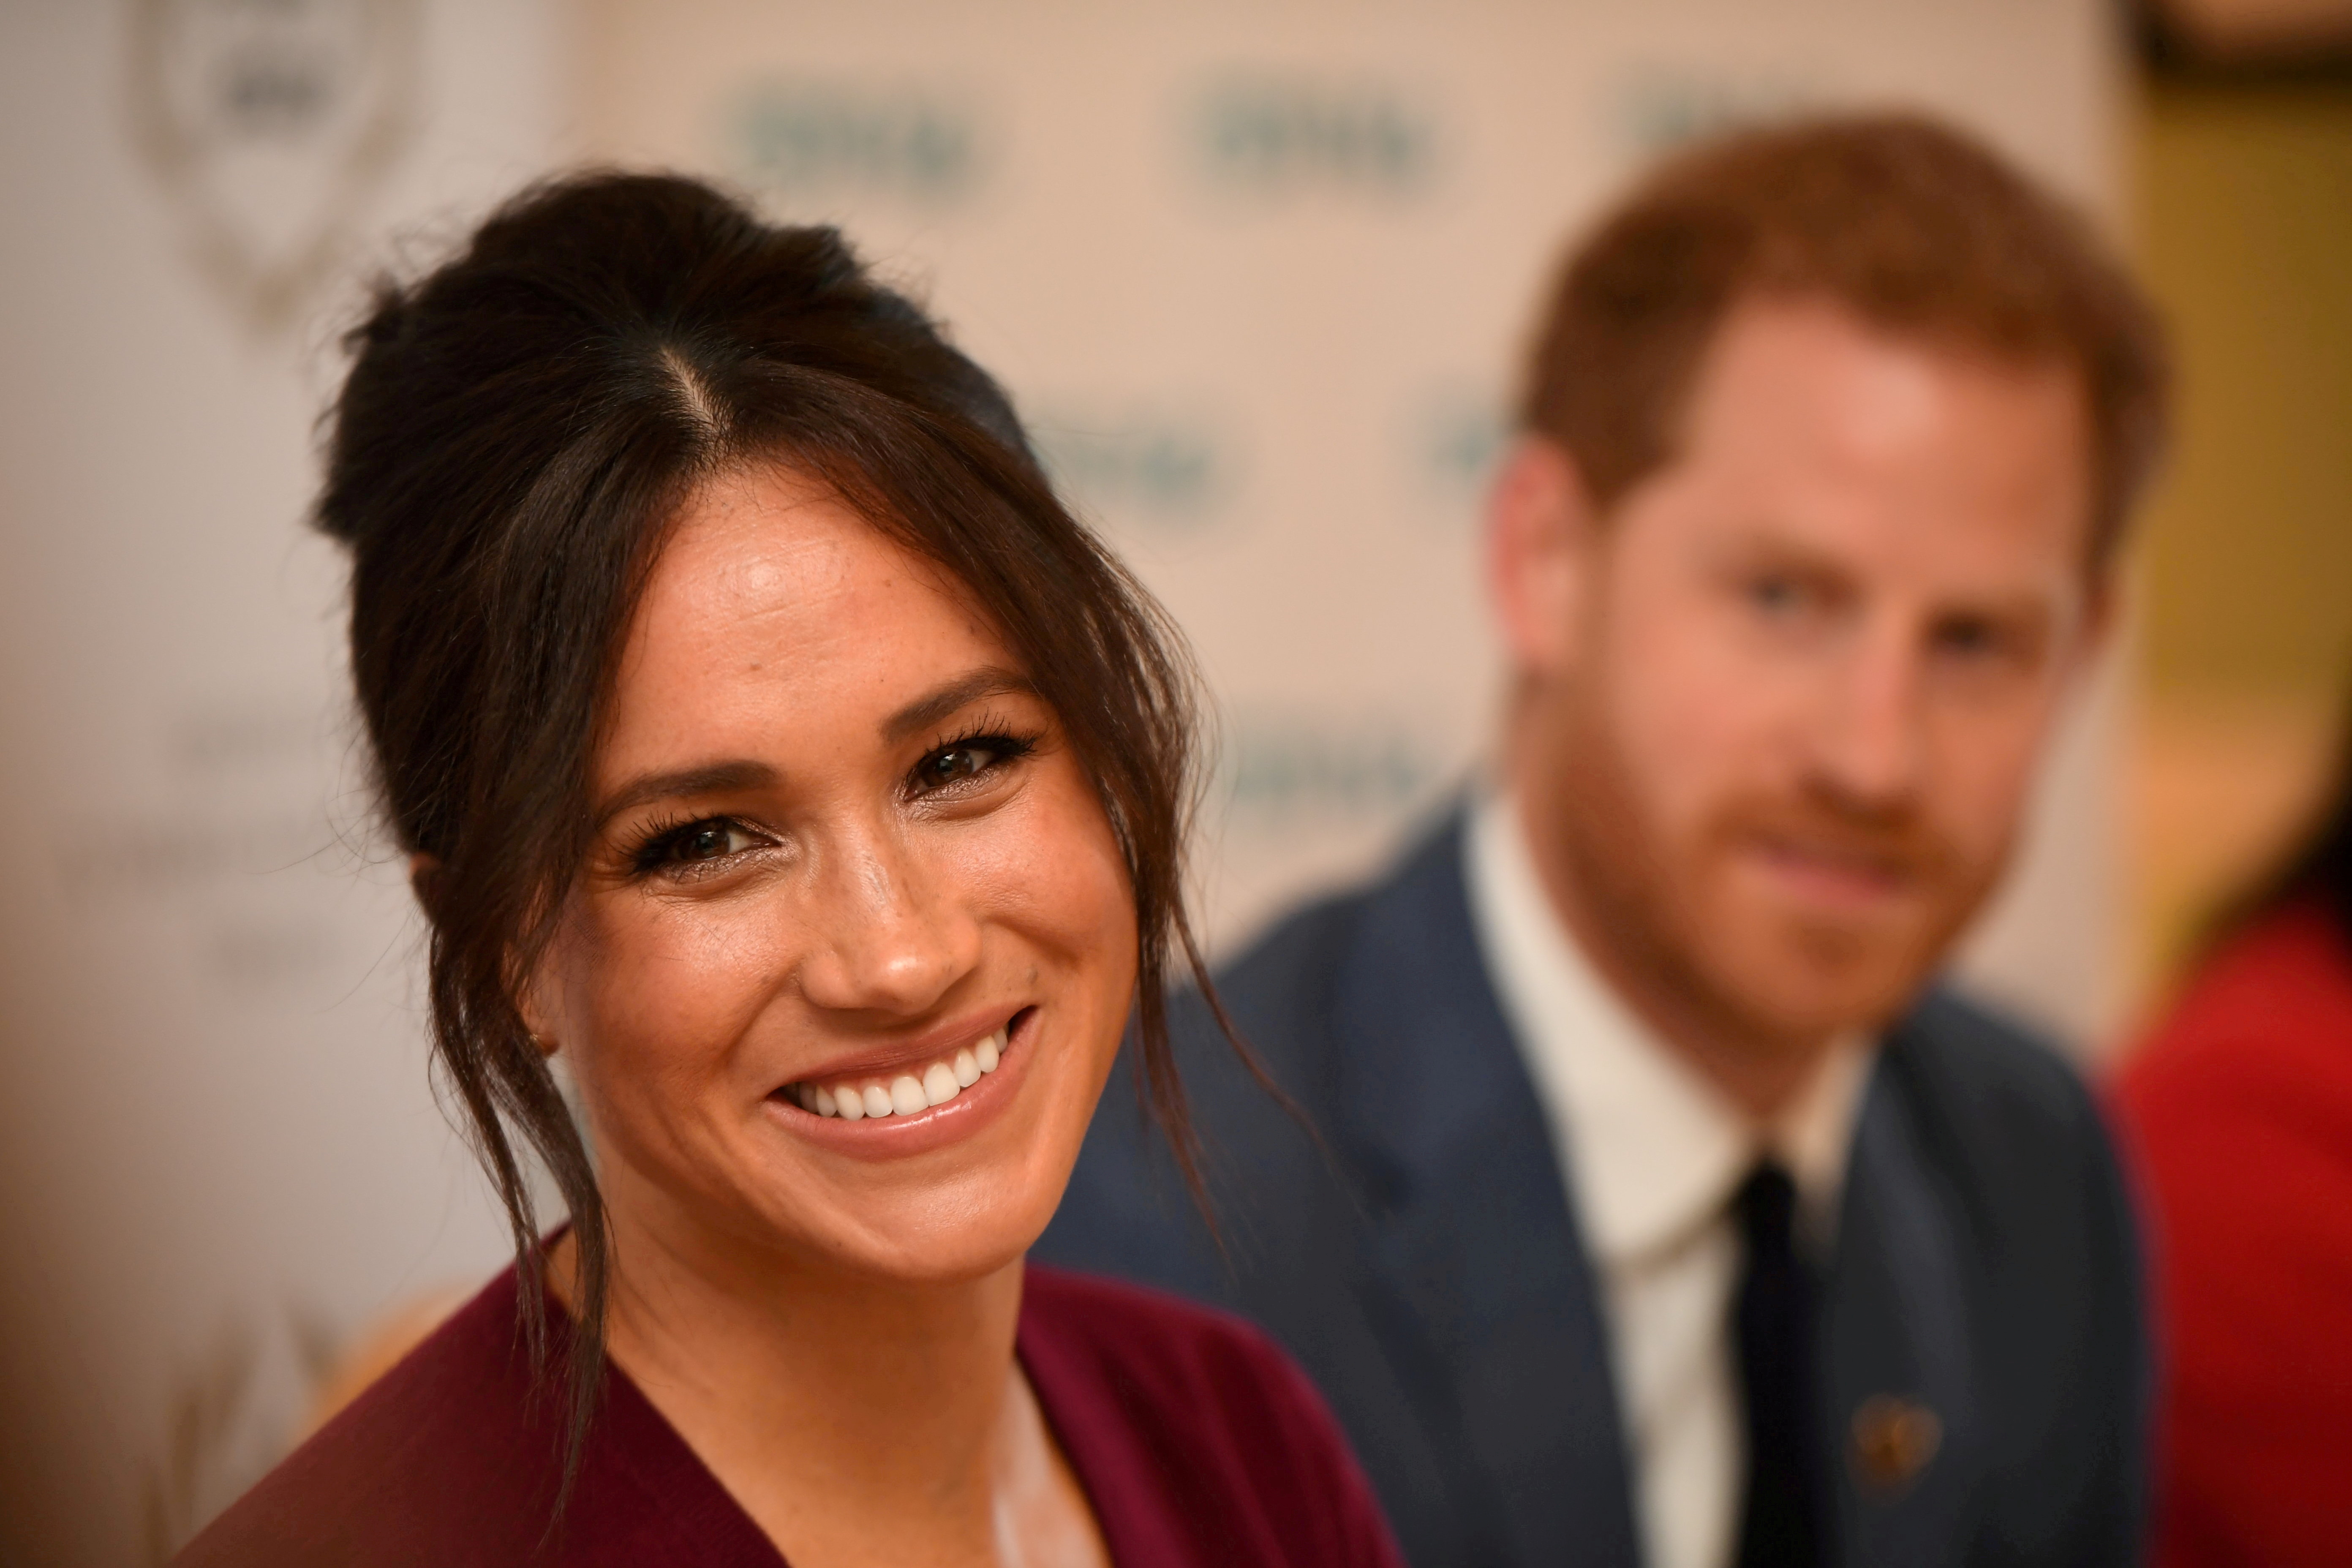 Britain's Meghan, the Duchess of Sussex, and Prince Harry, Duke of Sussex, attend a roundtable discussion on gender equality at Windsor Castle, Windsor, Britain October 25, 2019. Jeremy Selwyn/Pool via Reuters/File Photo